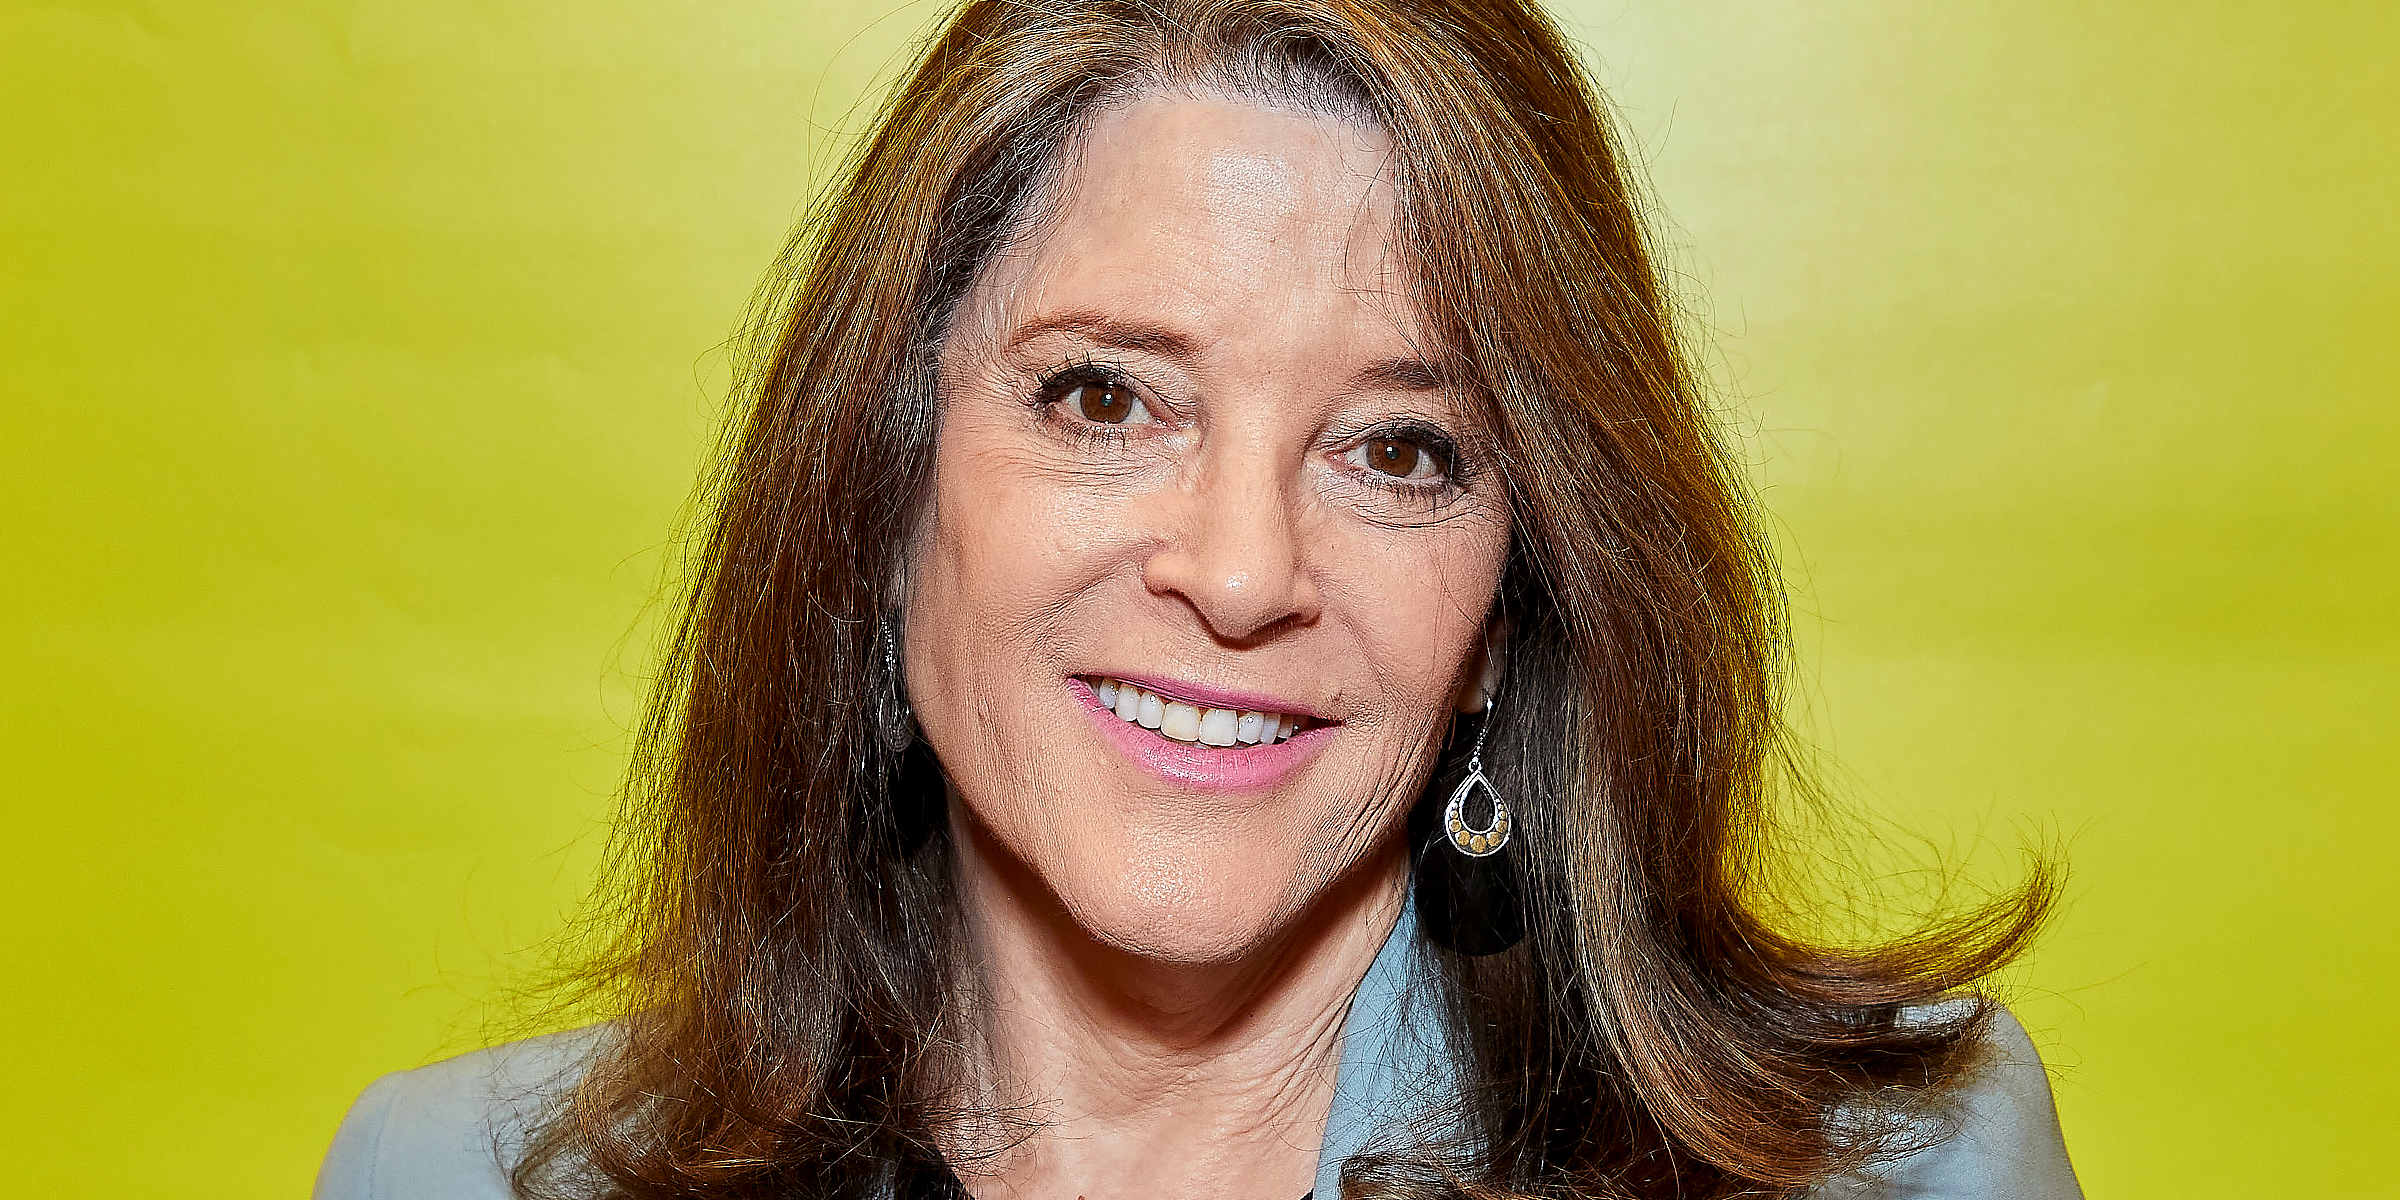 Marianne Williamson | Source: Getty Images